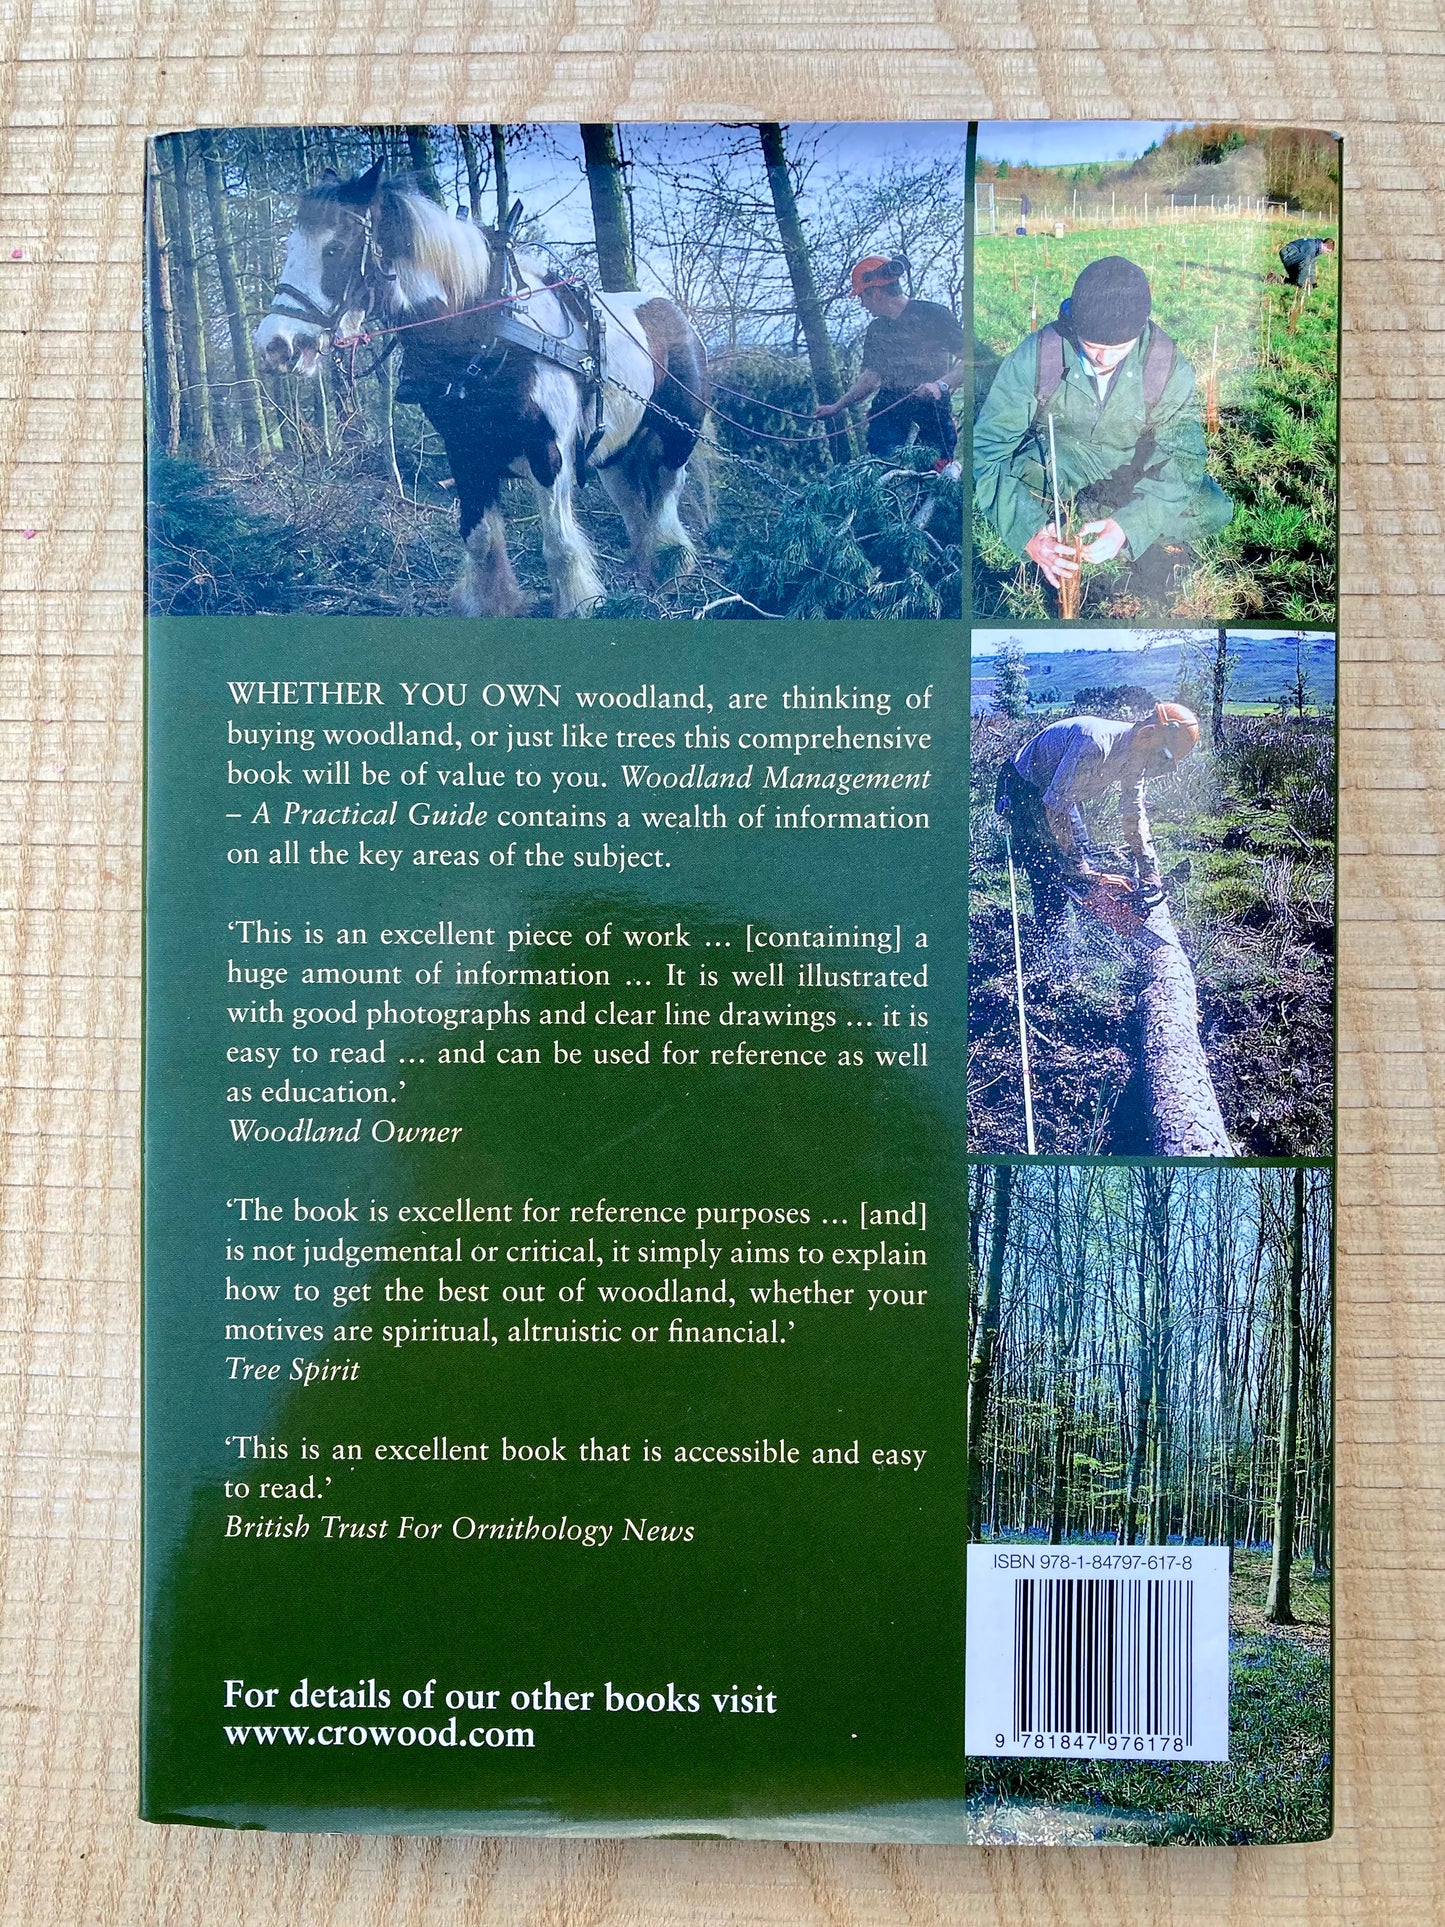 Woodland Management, A Practical Guide